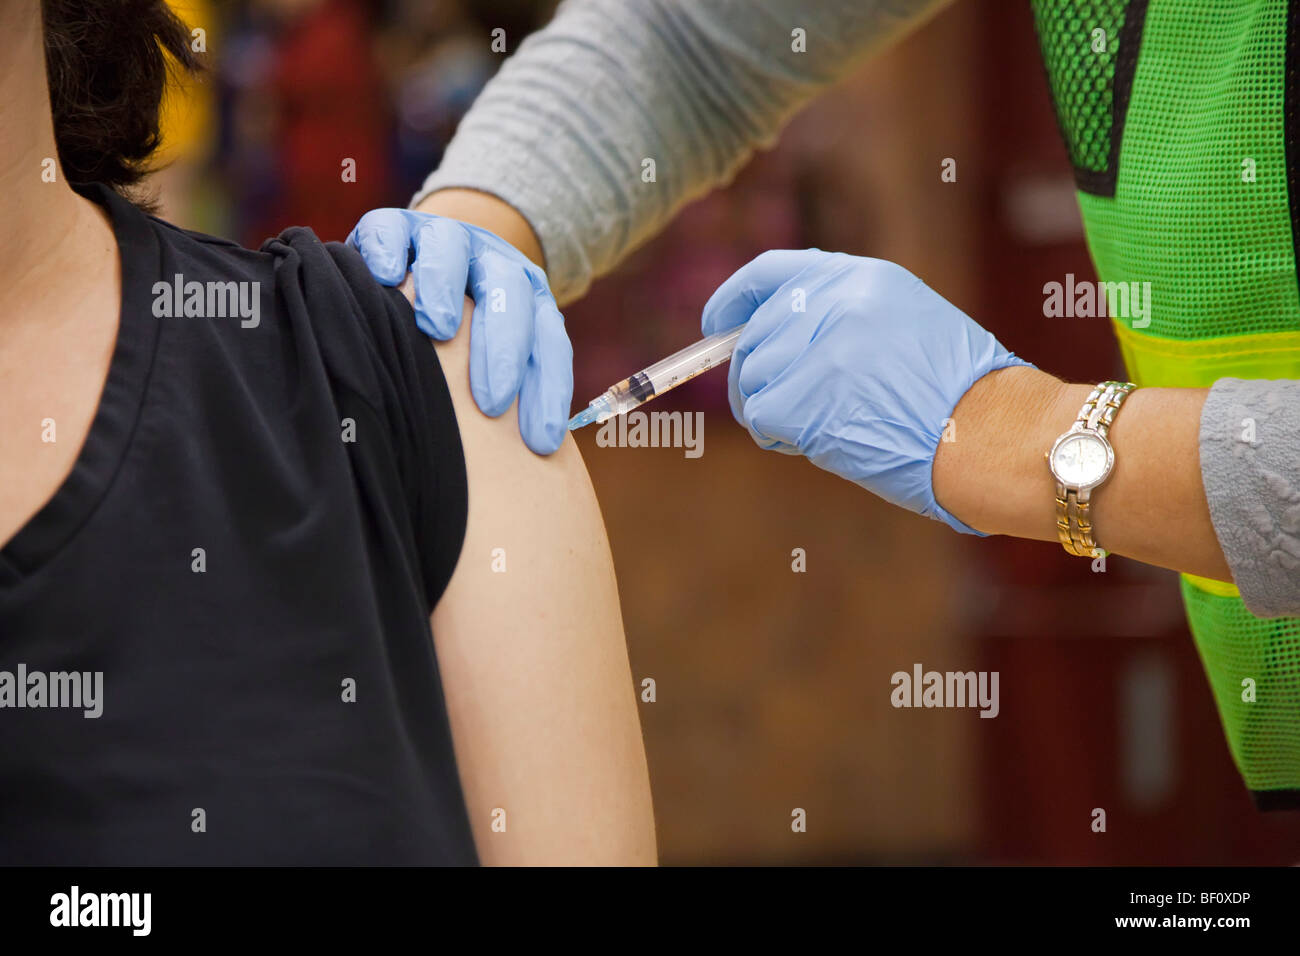 Hamtramck, Michigan - A health care worker vaccinates a resident of the Detroit area against the H1N1 swine flu. Stock Photo